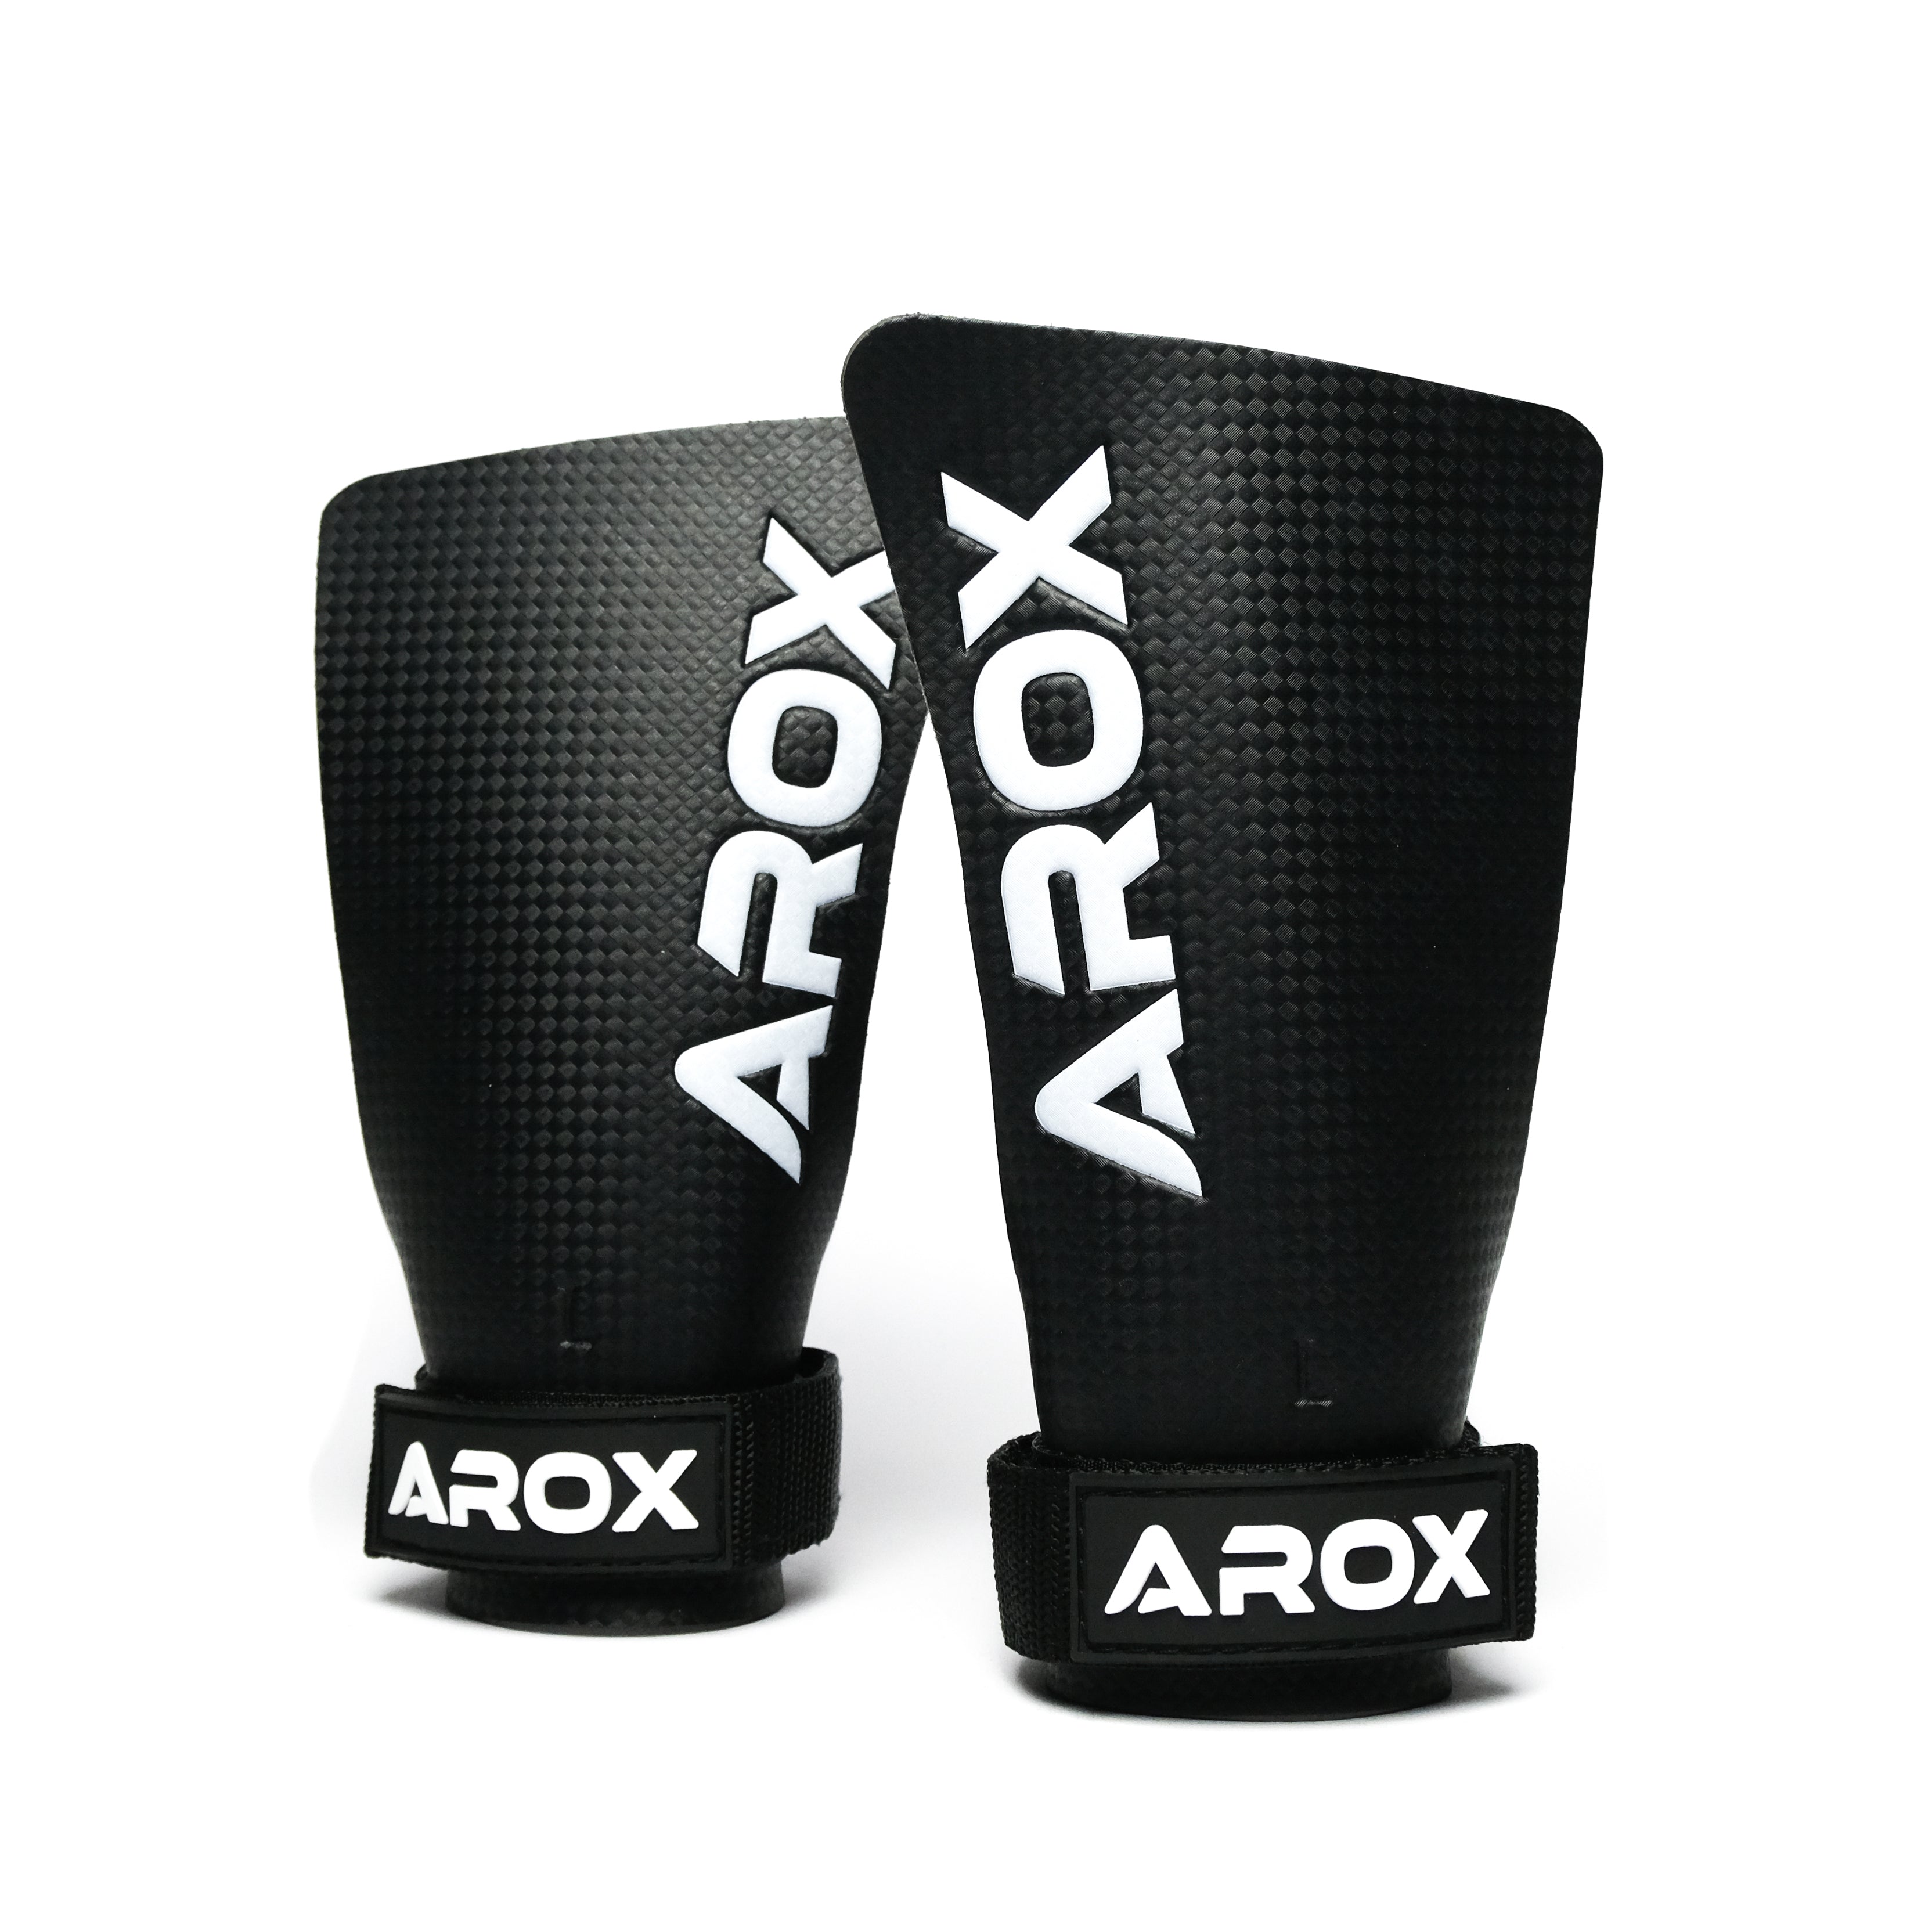 Arox - 360 carbon grips